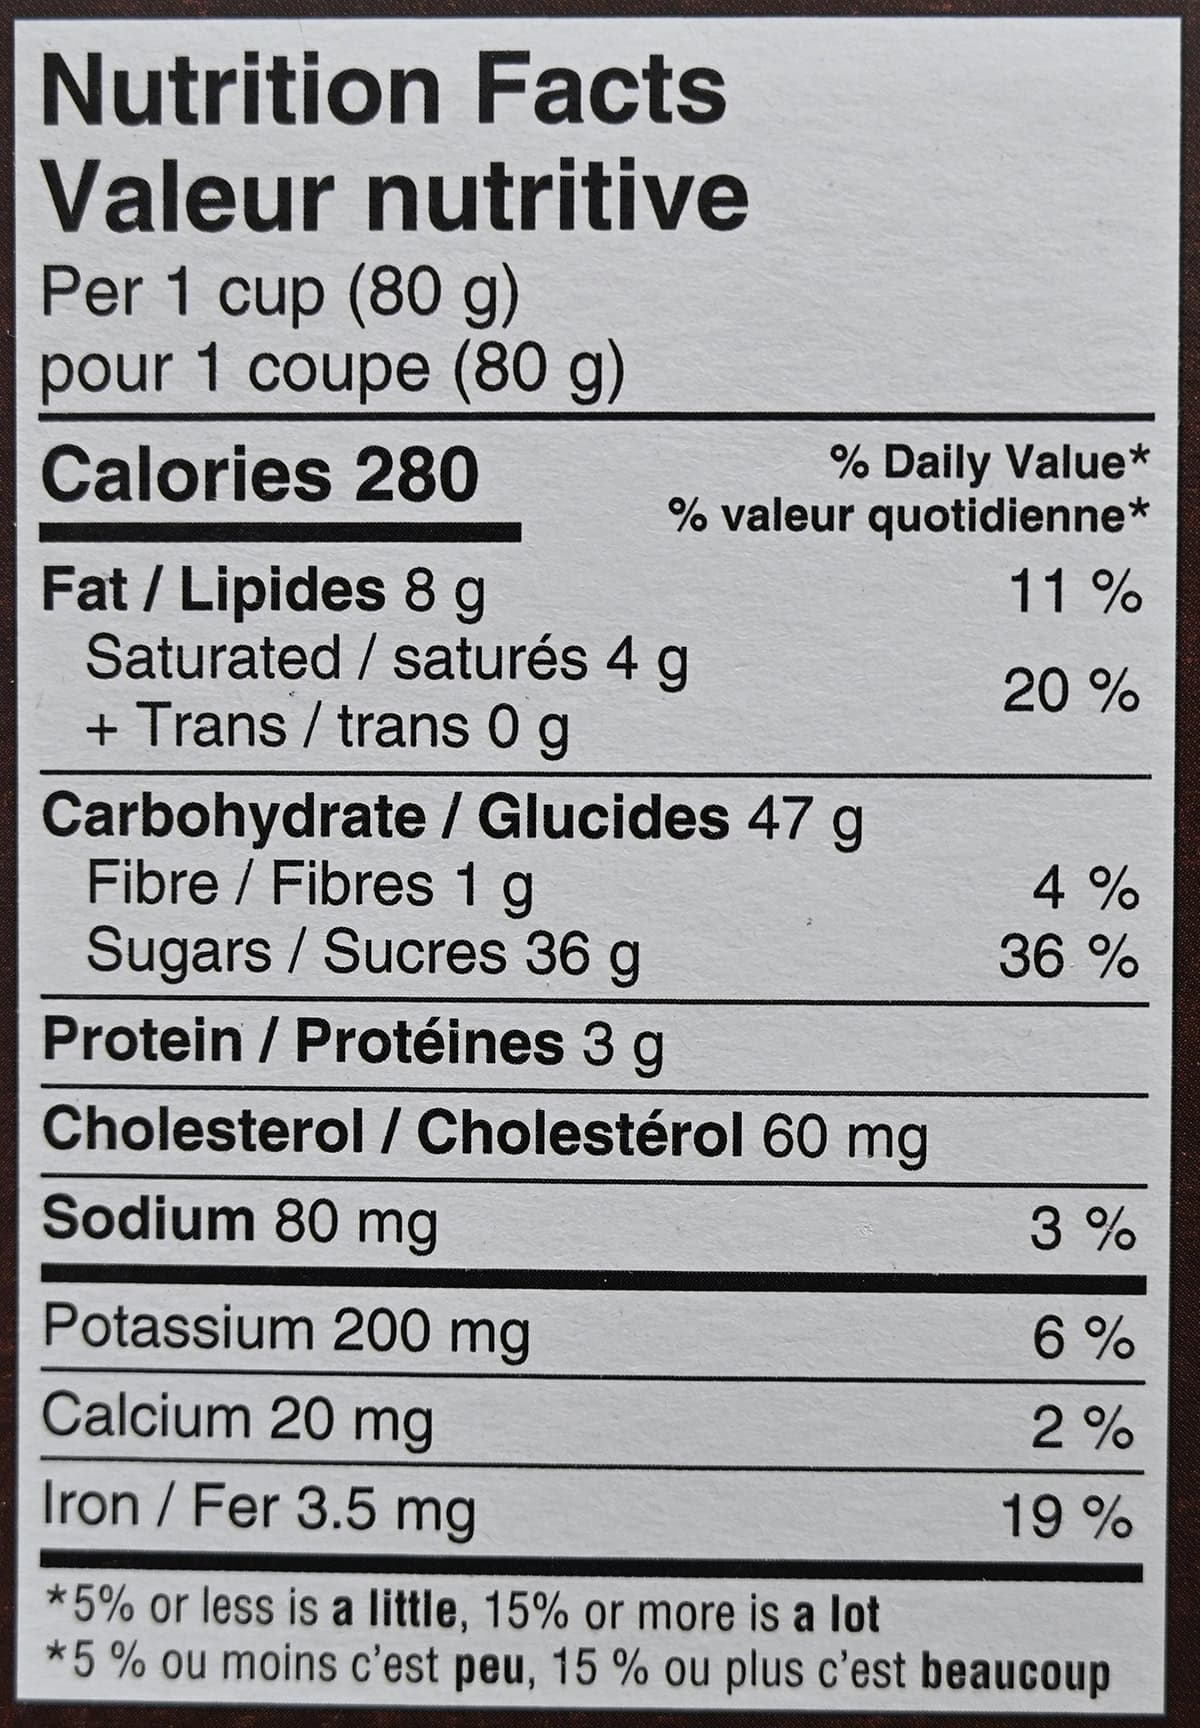 Image of the nutrition facts for the Delici Lemon Meringue Pie desserts from the back of the box.